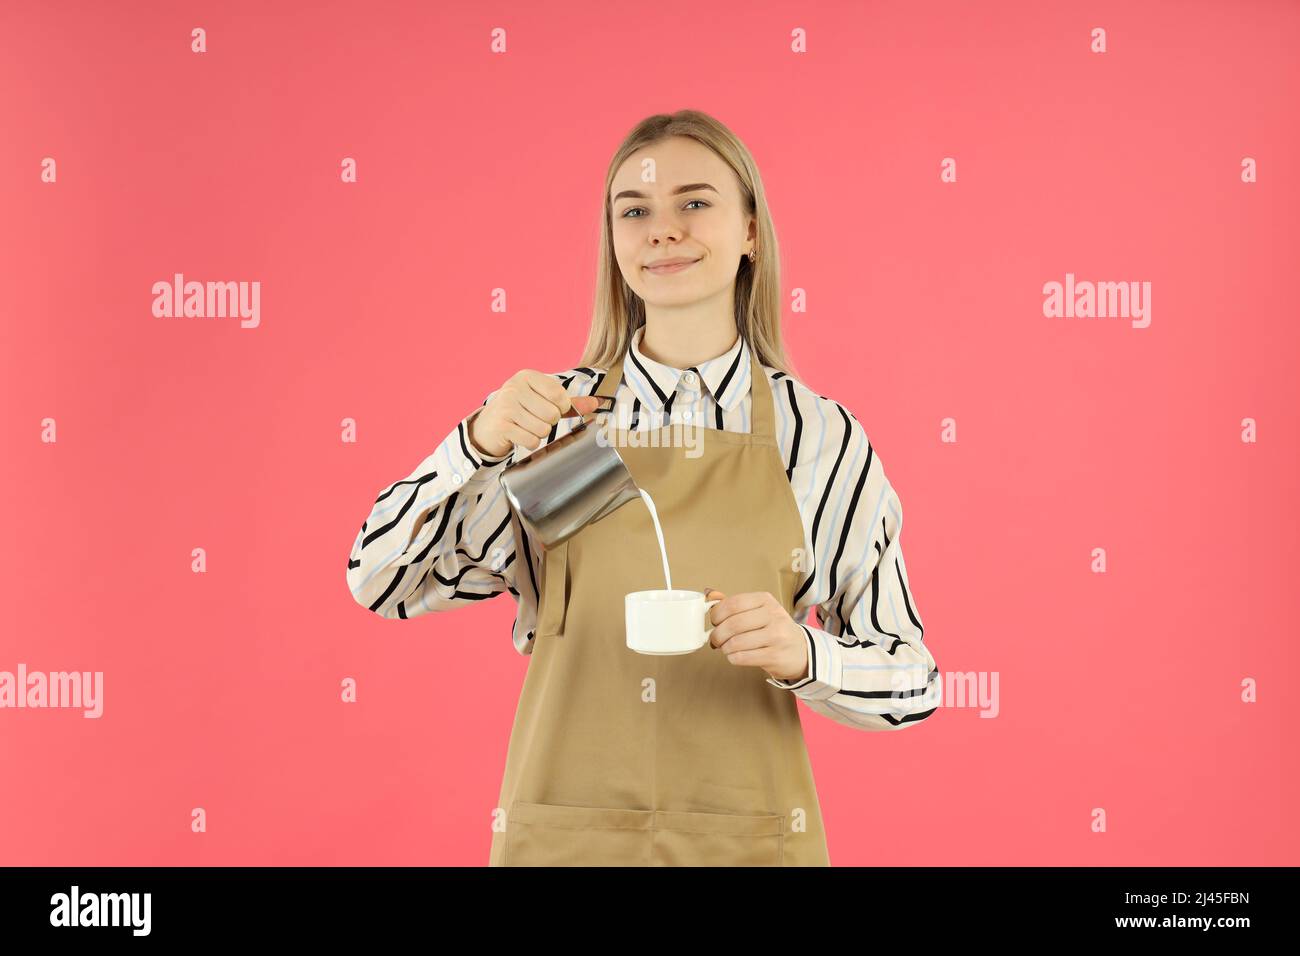 Concept of job with young woman waiter Stock Photo